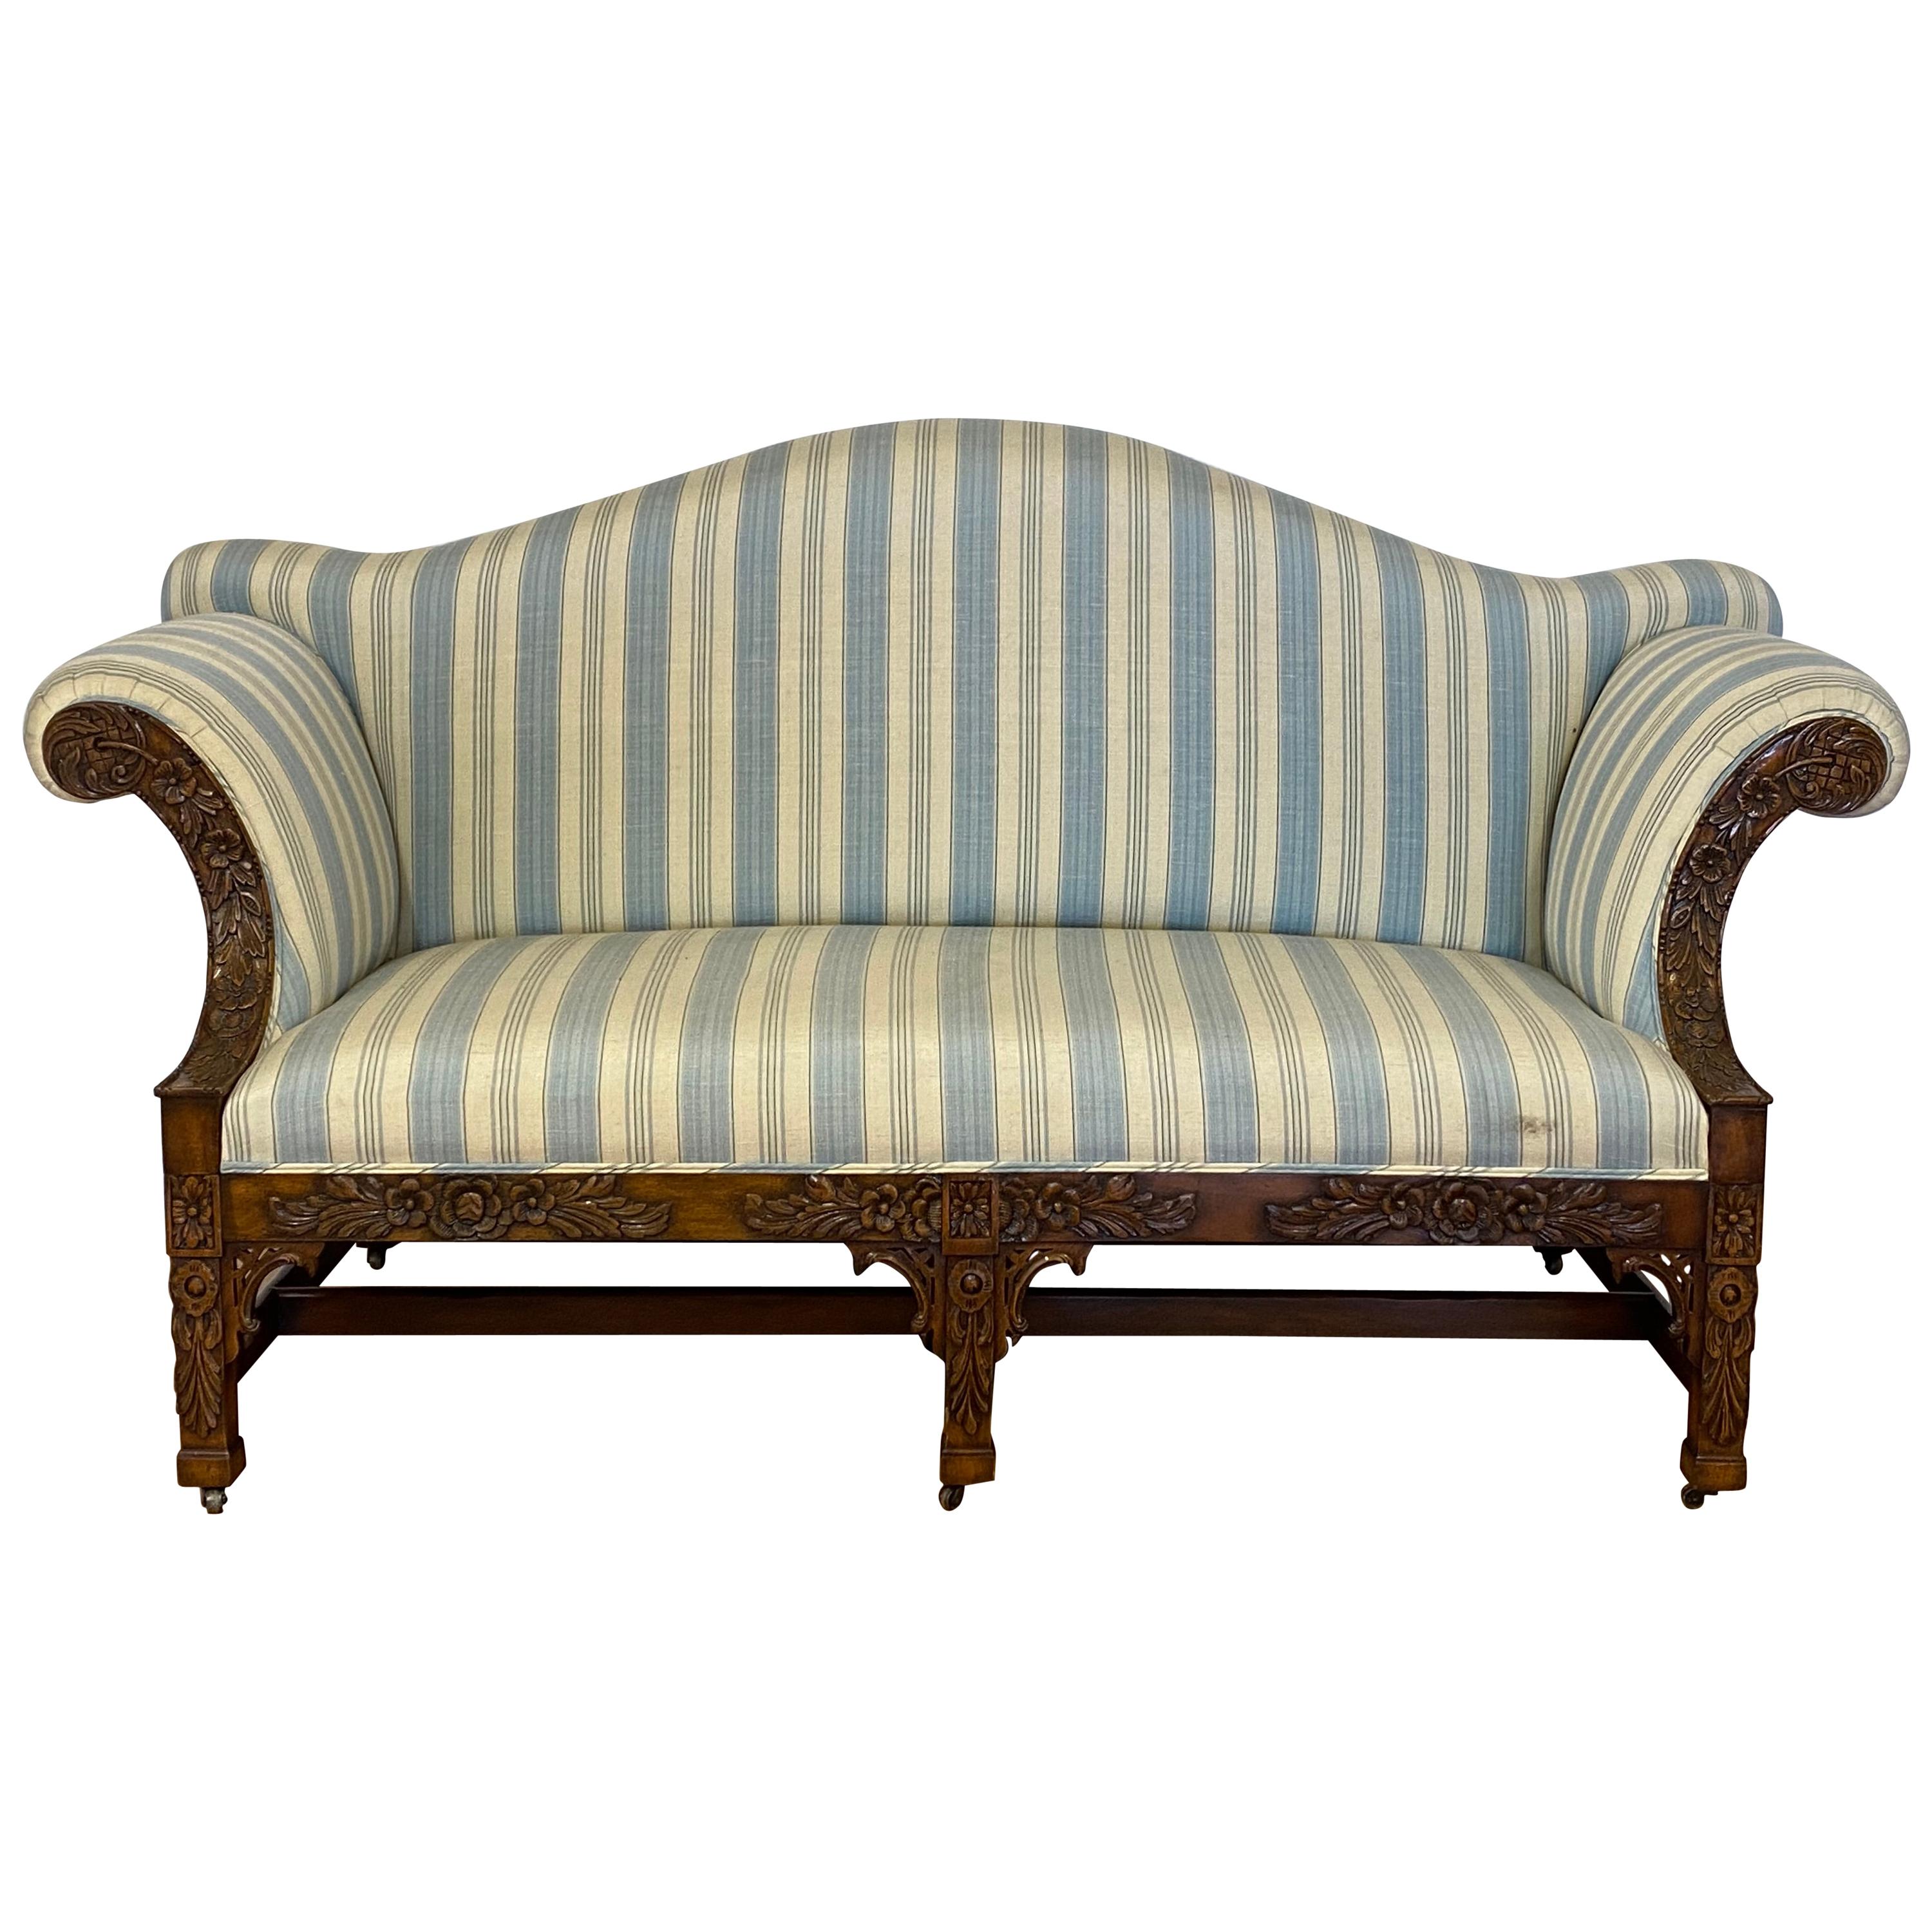 American Carved Mahogany and Upholstered Chippendale Style Settee